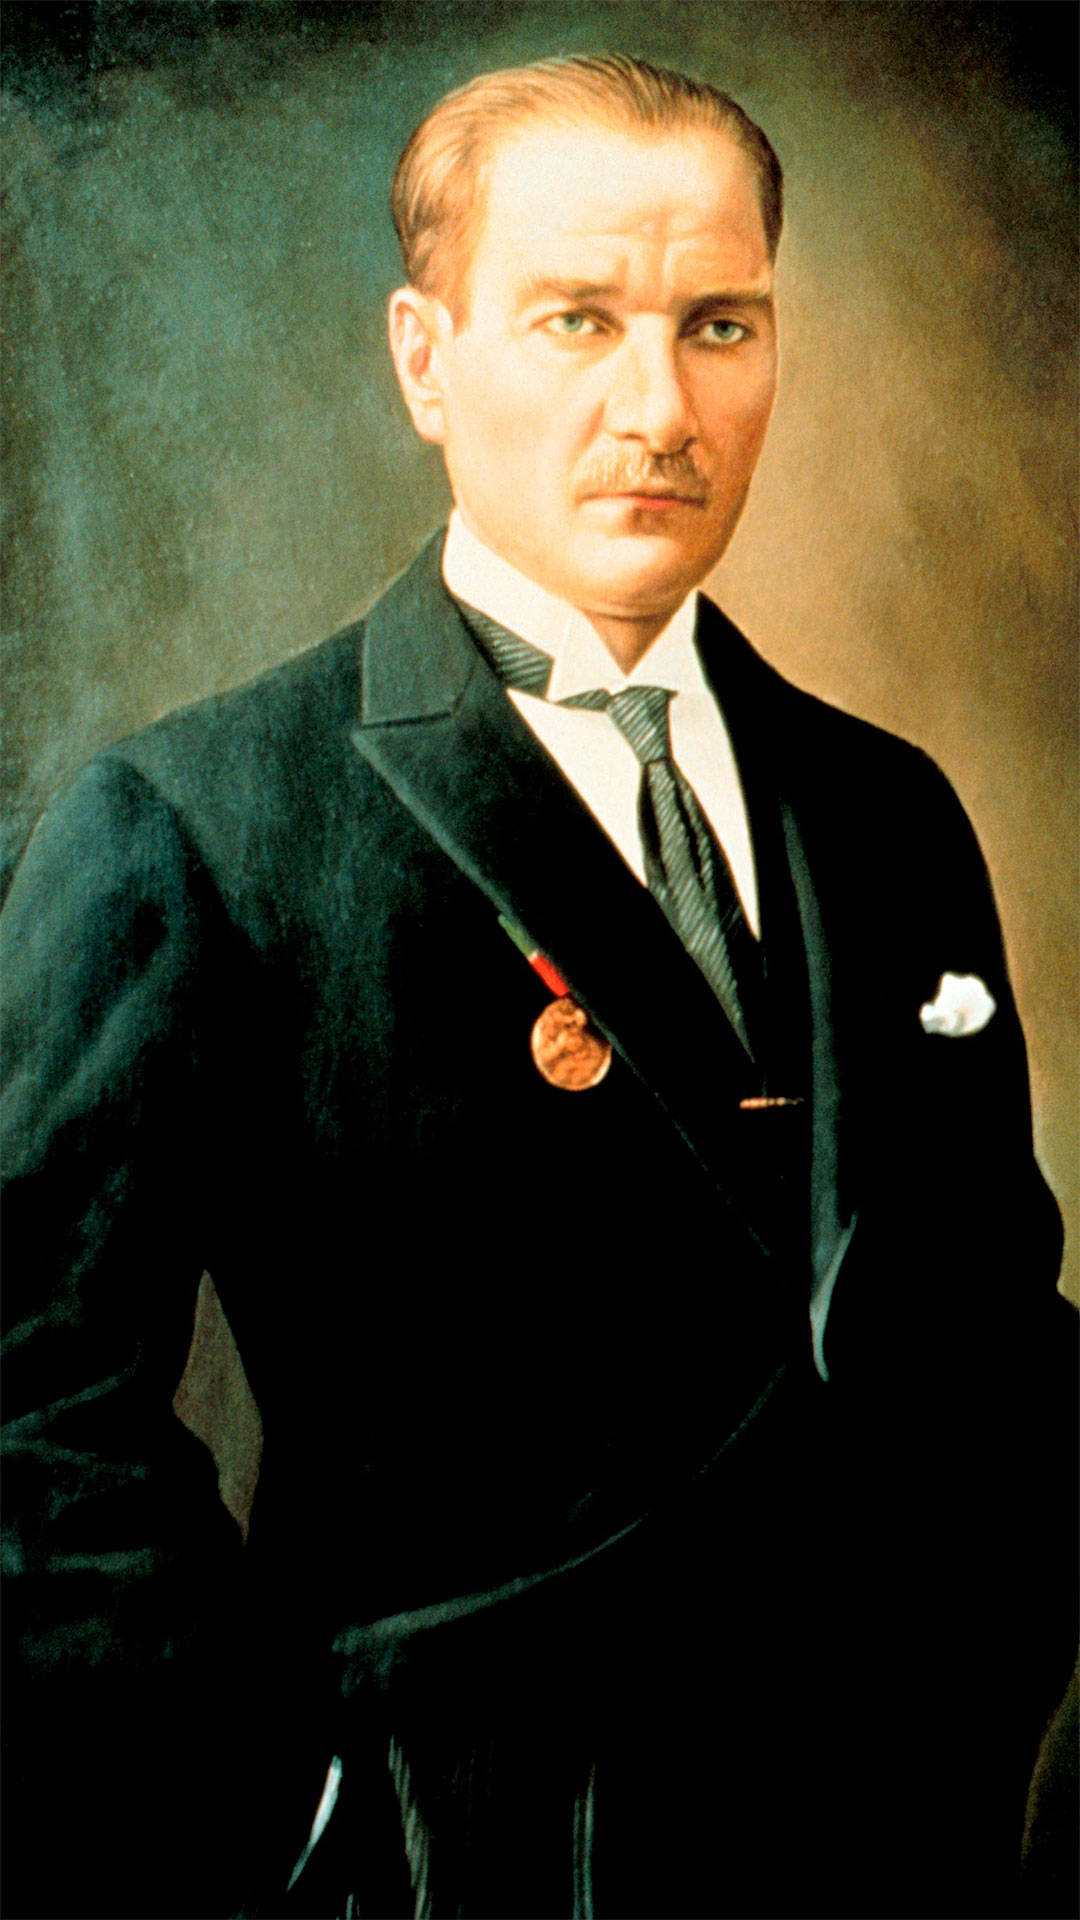 Painting Of A Serious Ataturk Background